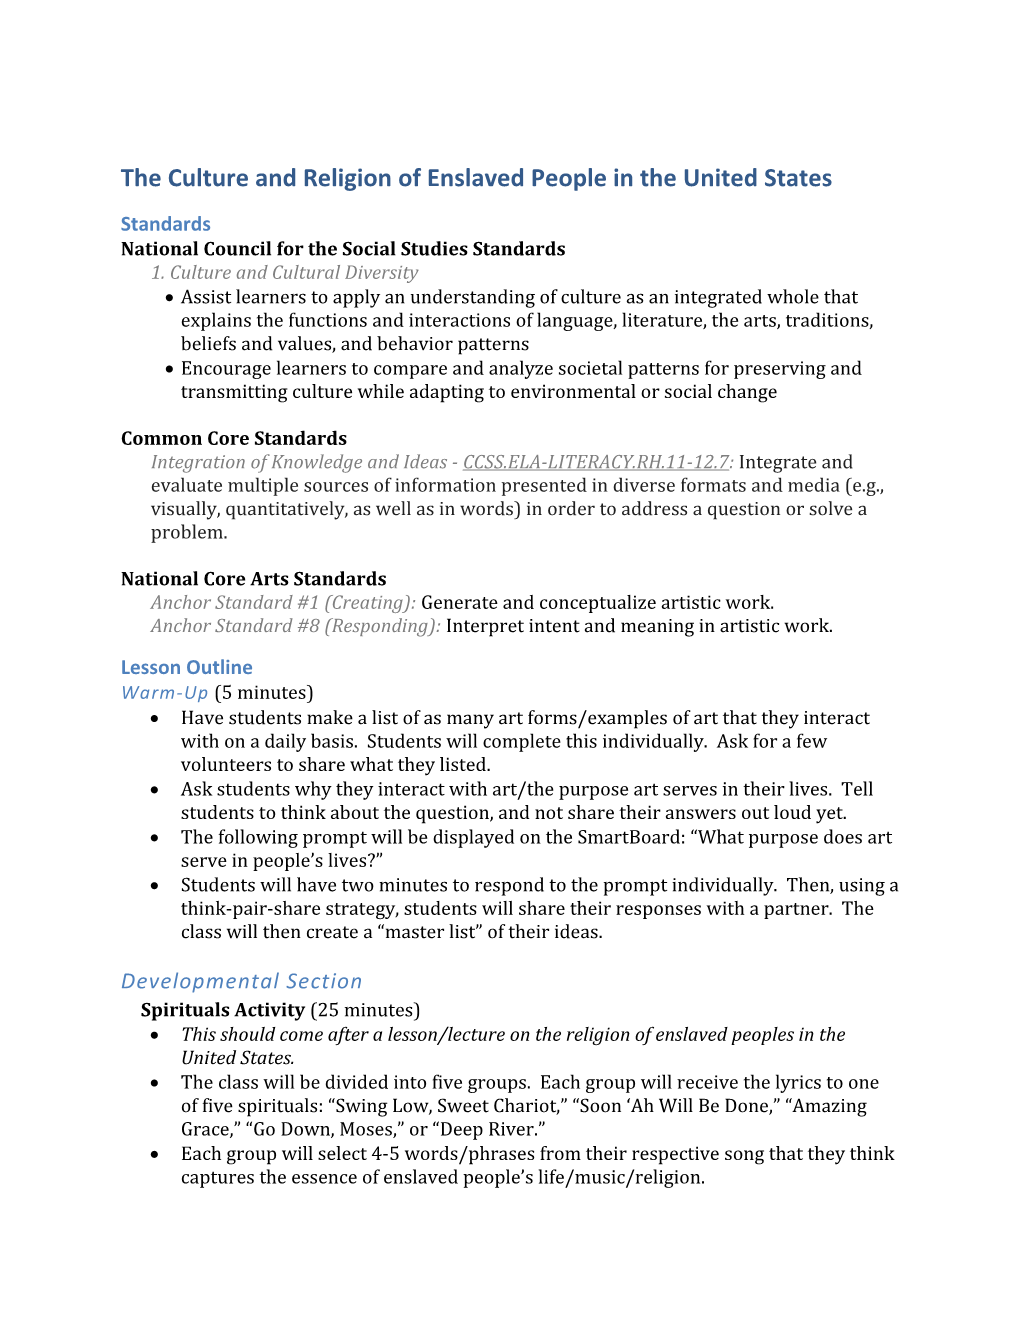 The Culture and Religion of Enslaved People in the United States